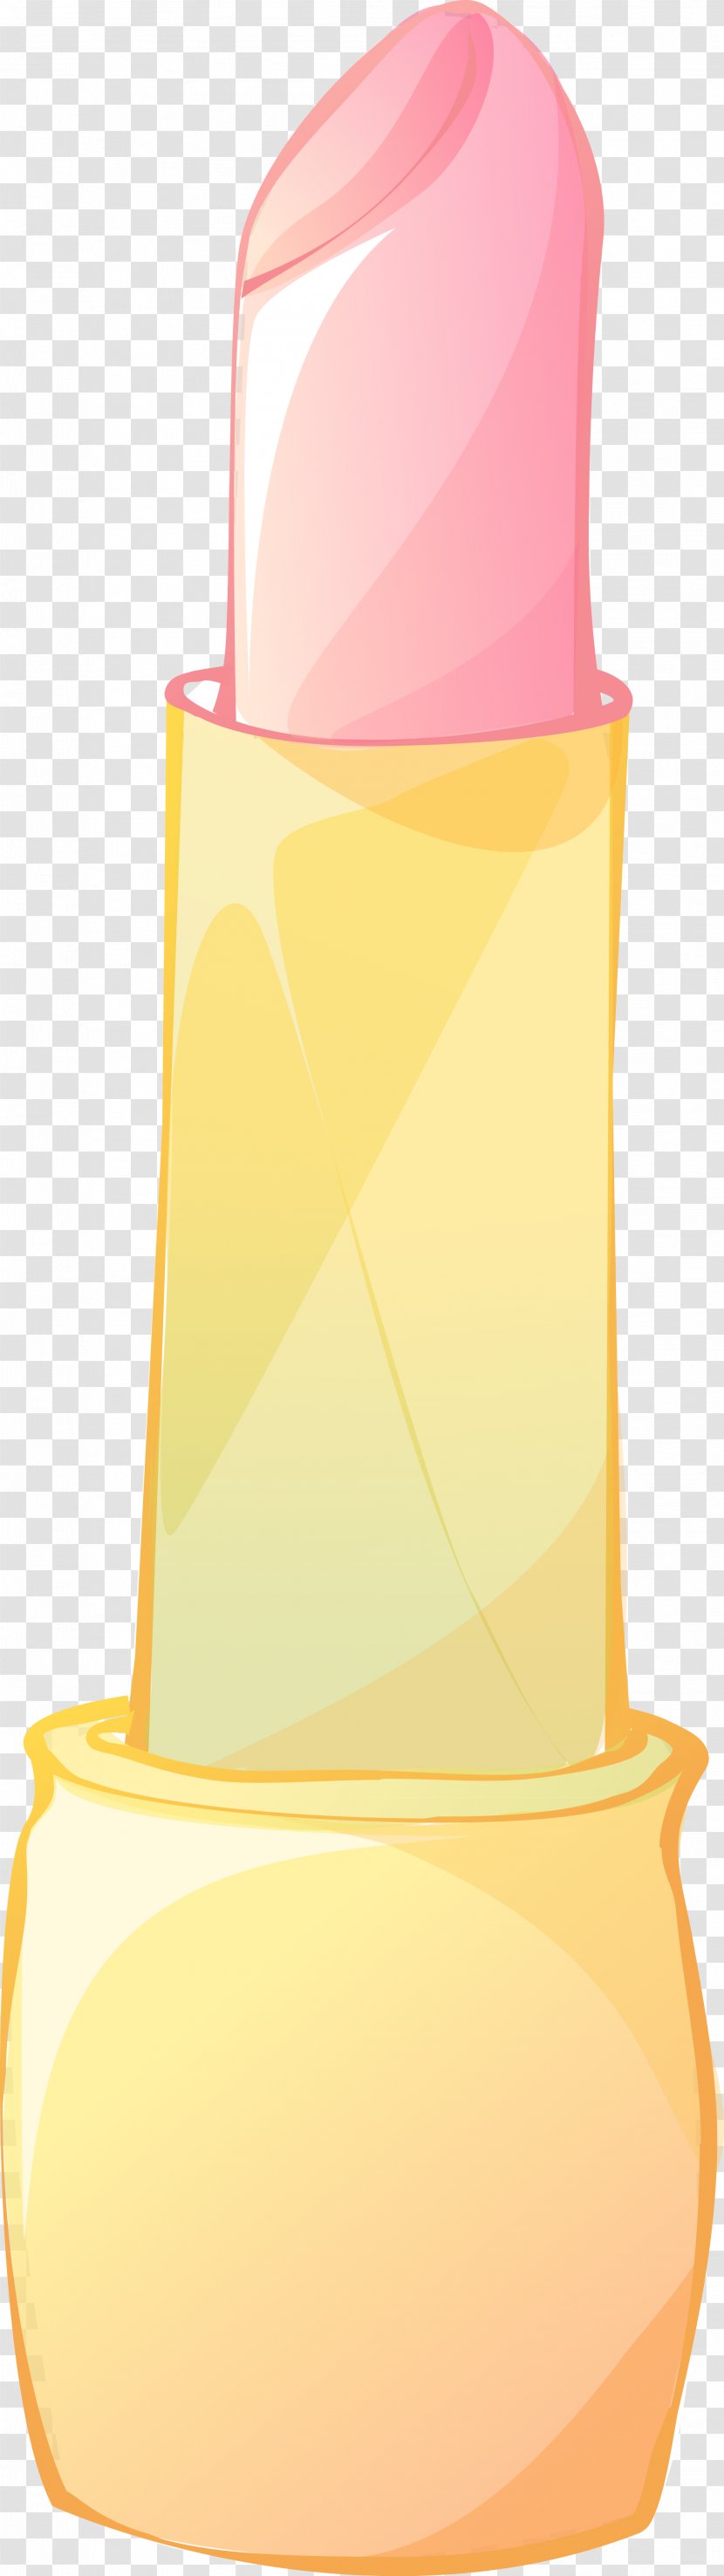 Hat Rectangle - Peach - Cosmetics Posters Transparent PNG